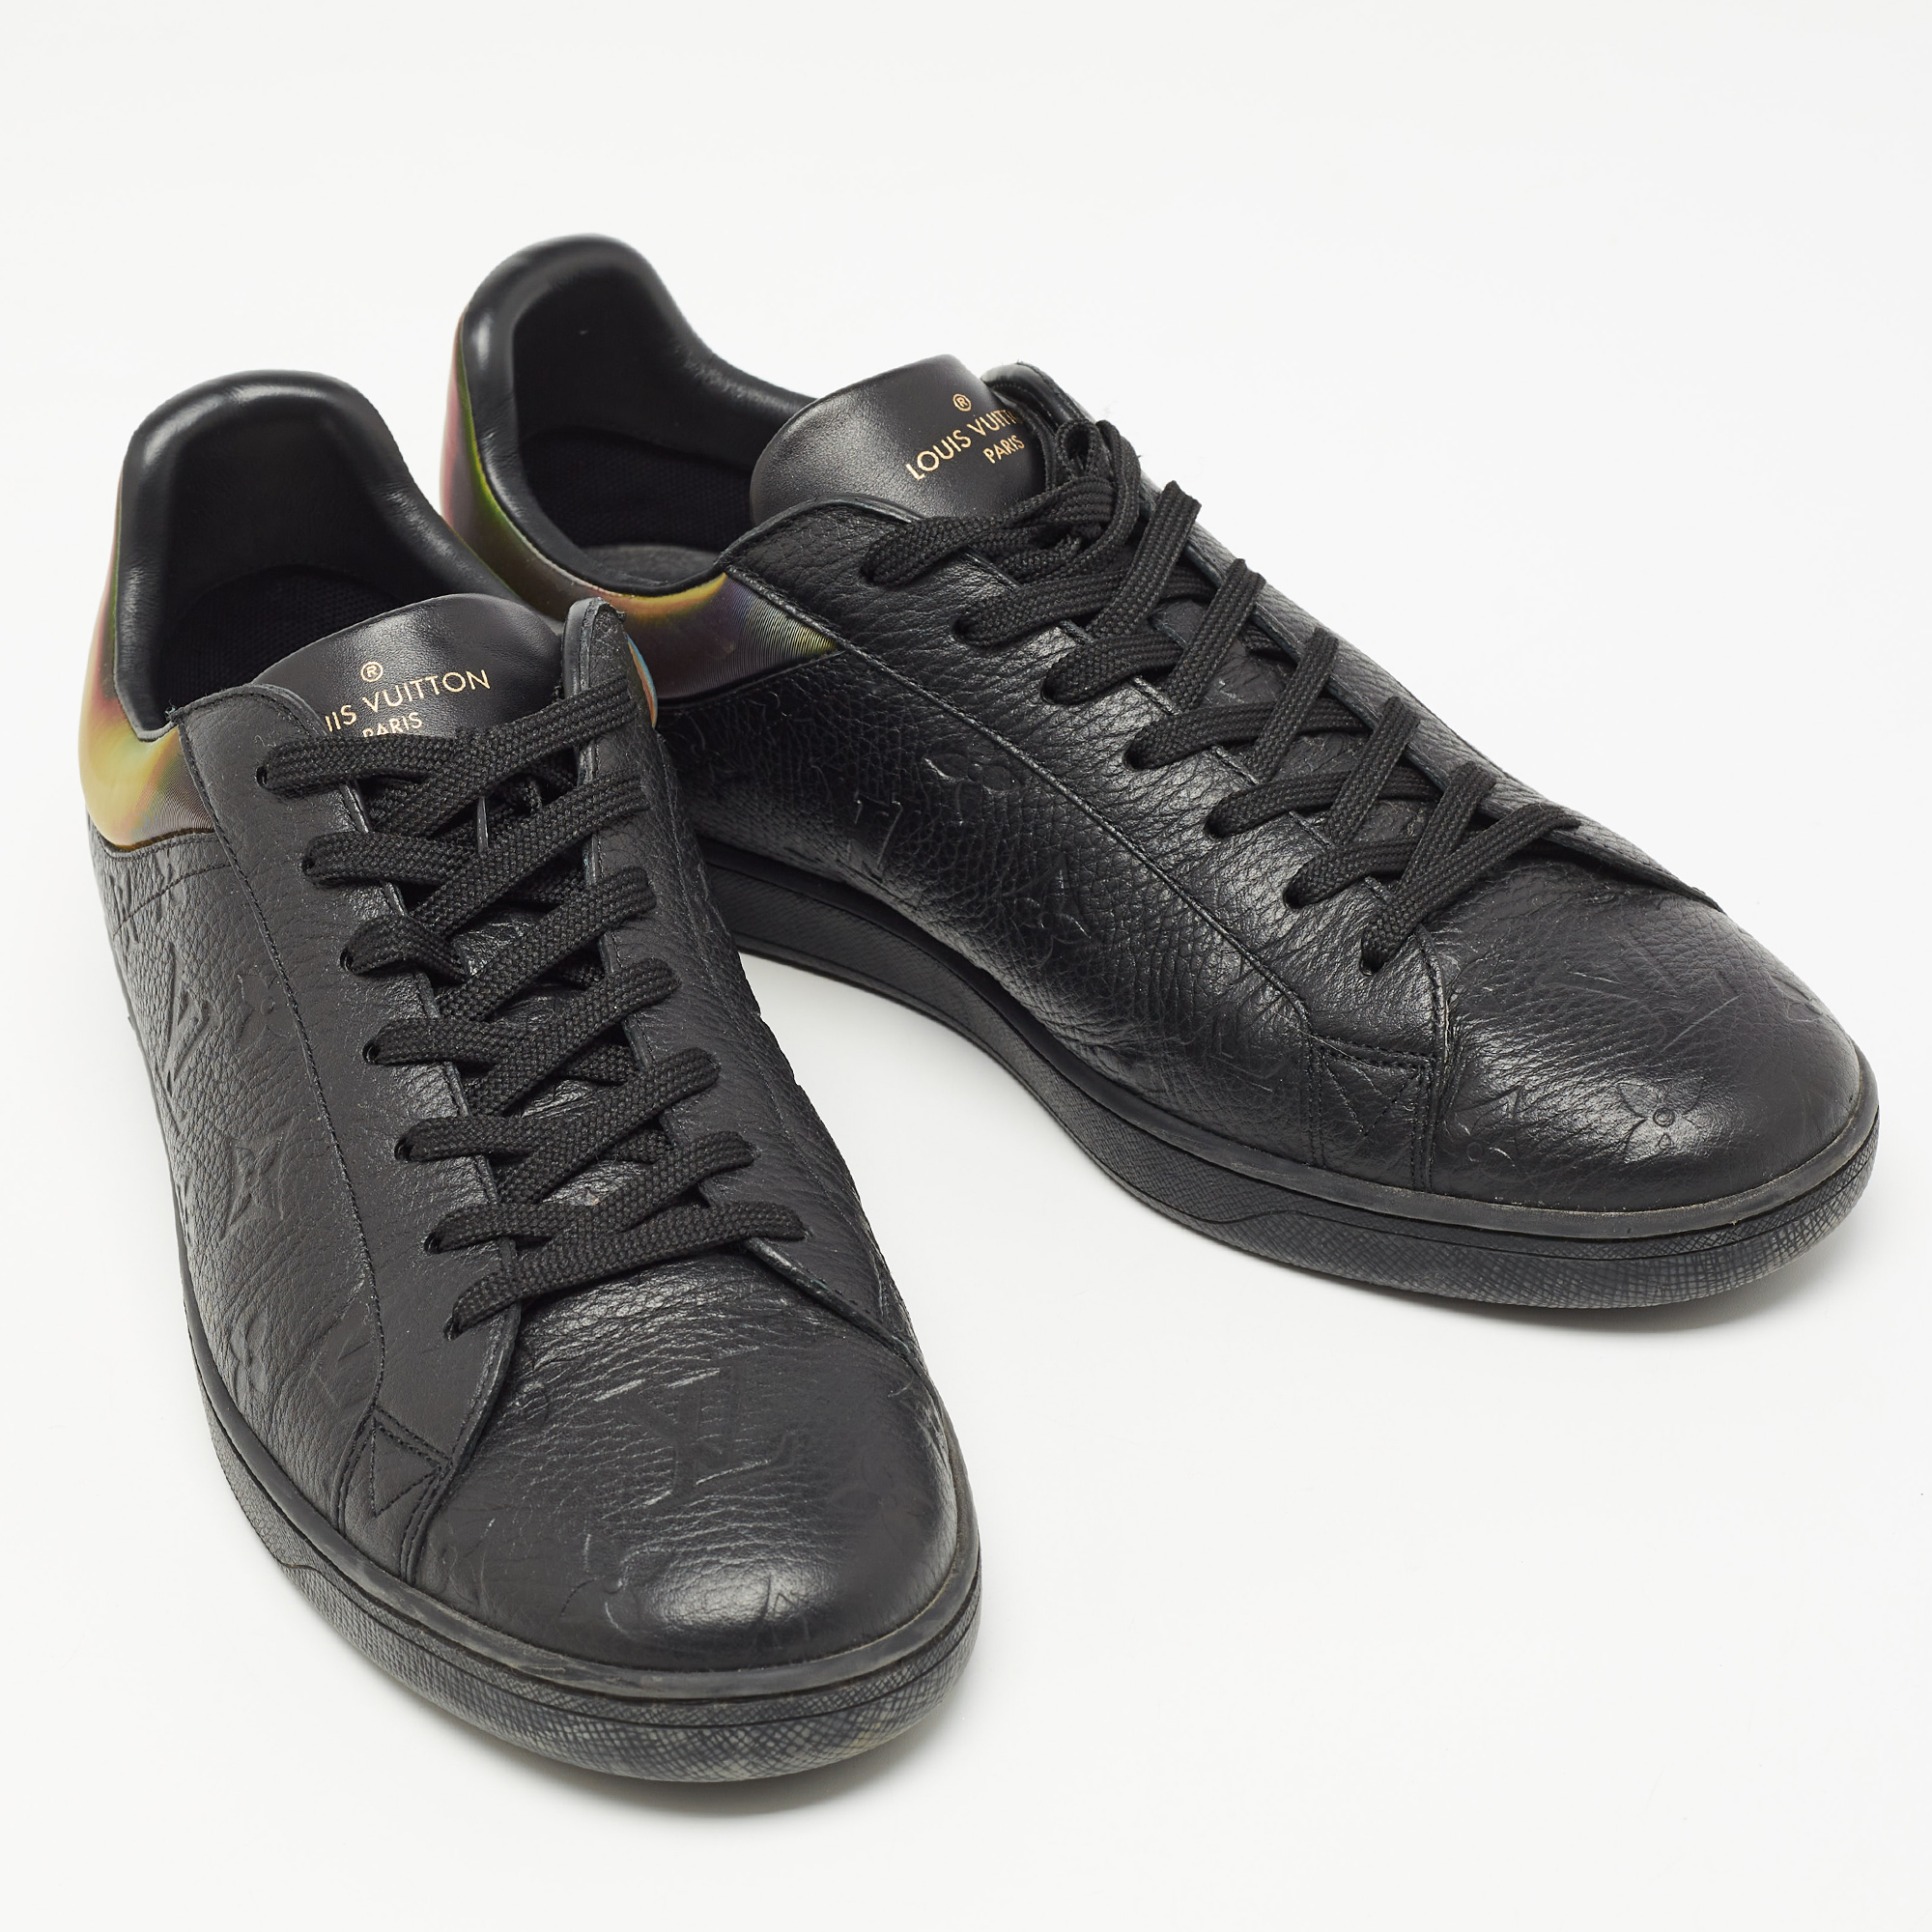 Louis Vuitton Black Monogram Embossed Leather Luxembourg Sneakers Size 42.5